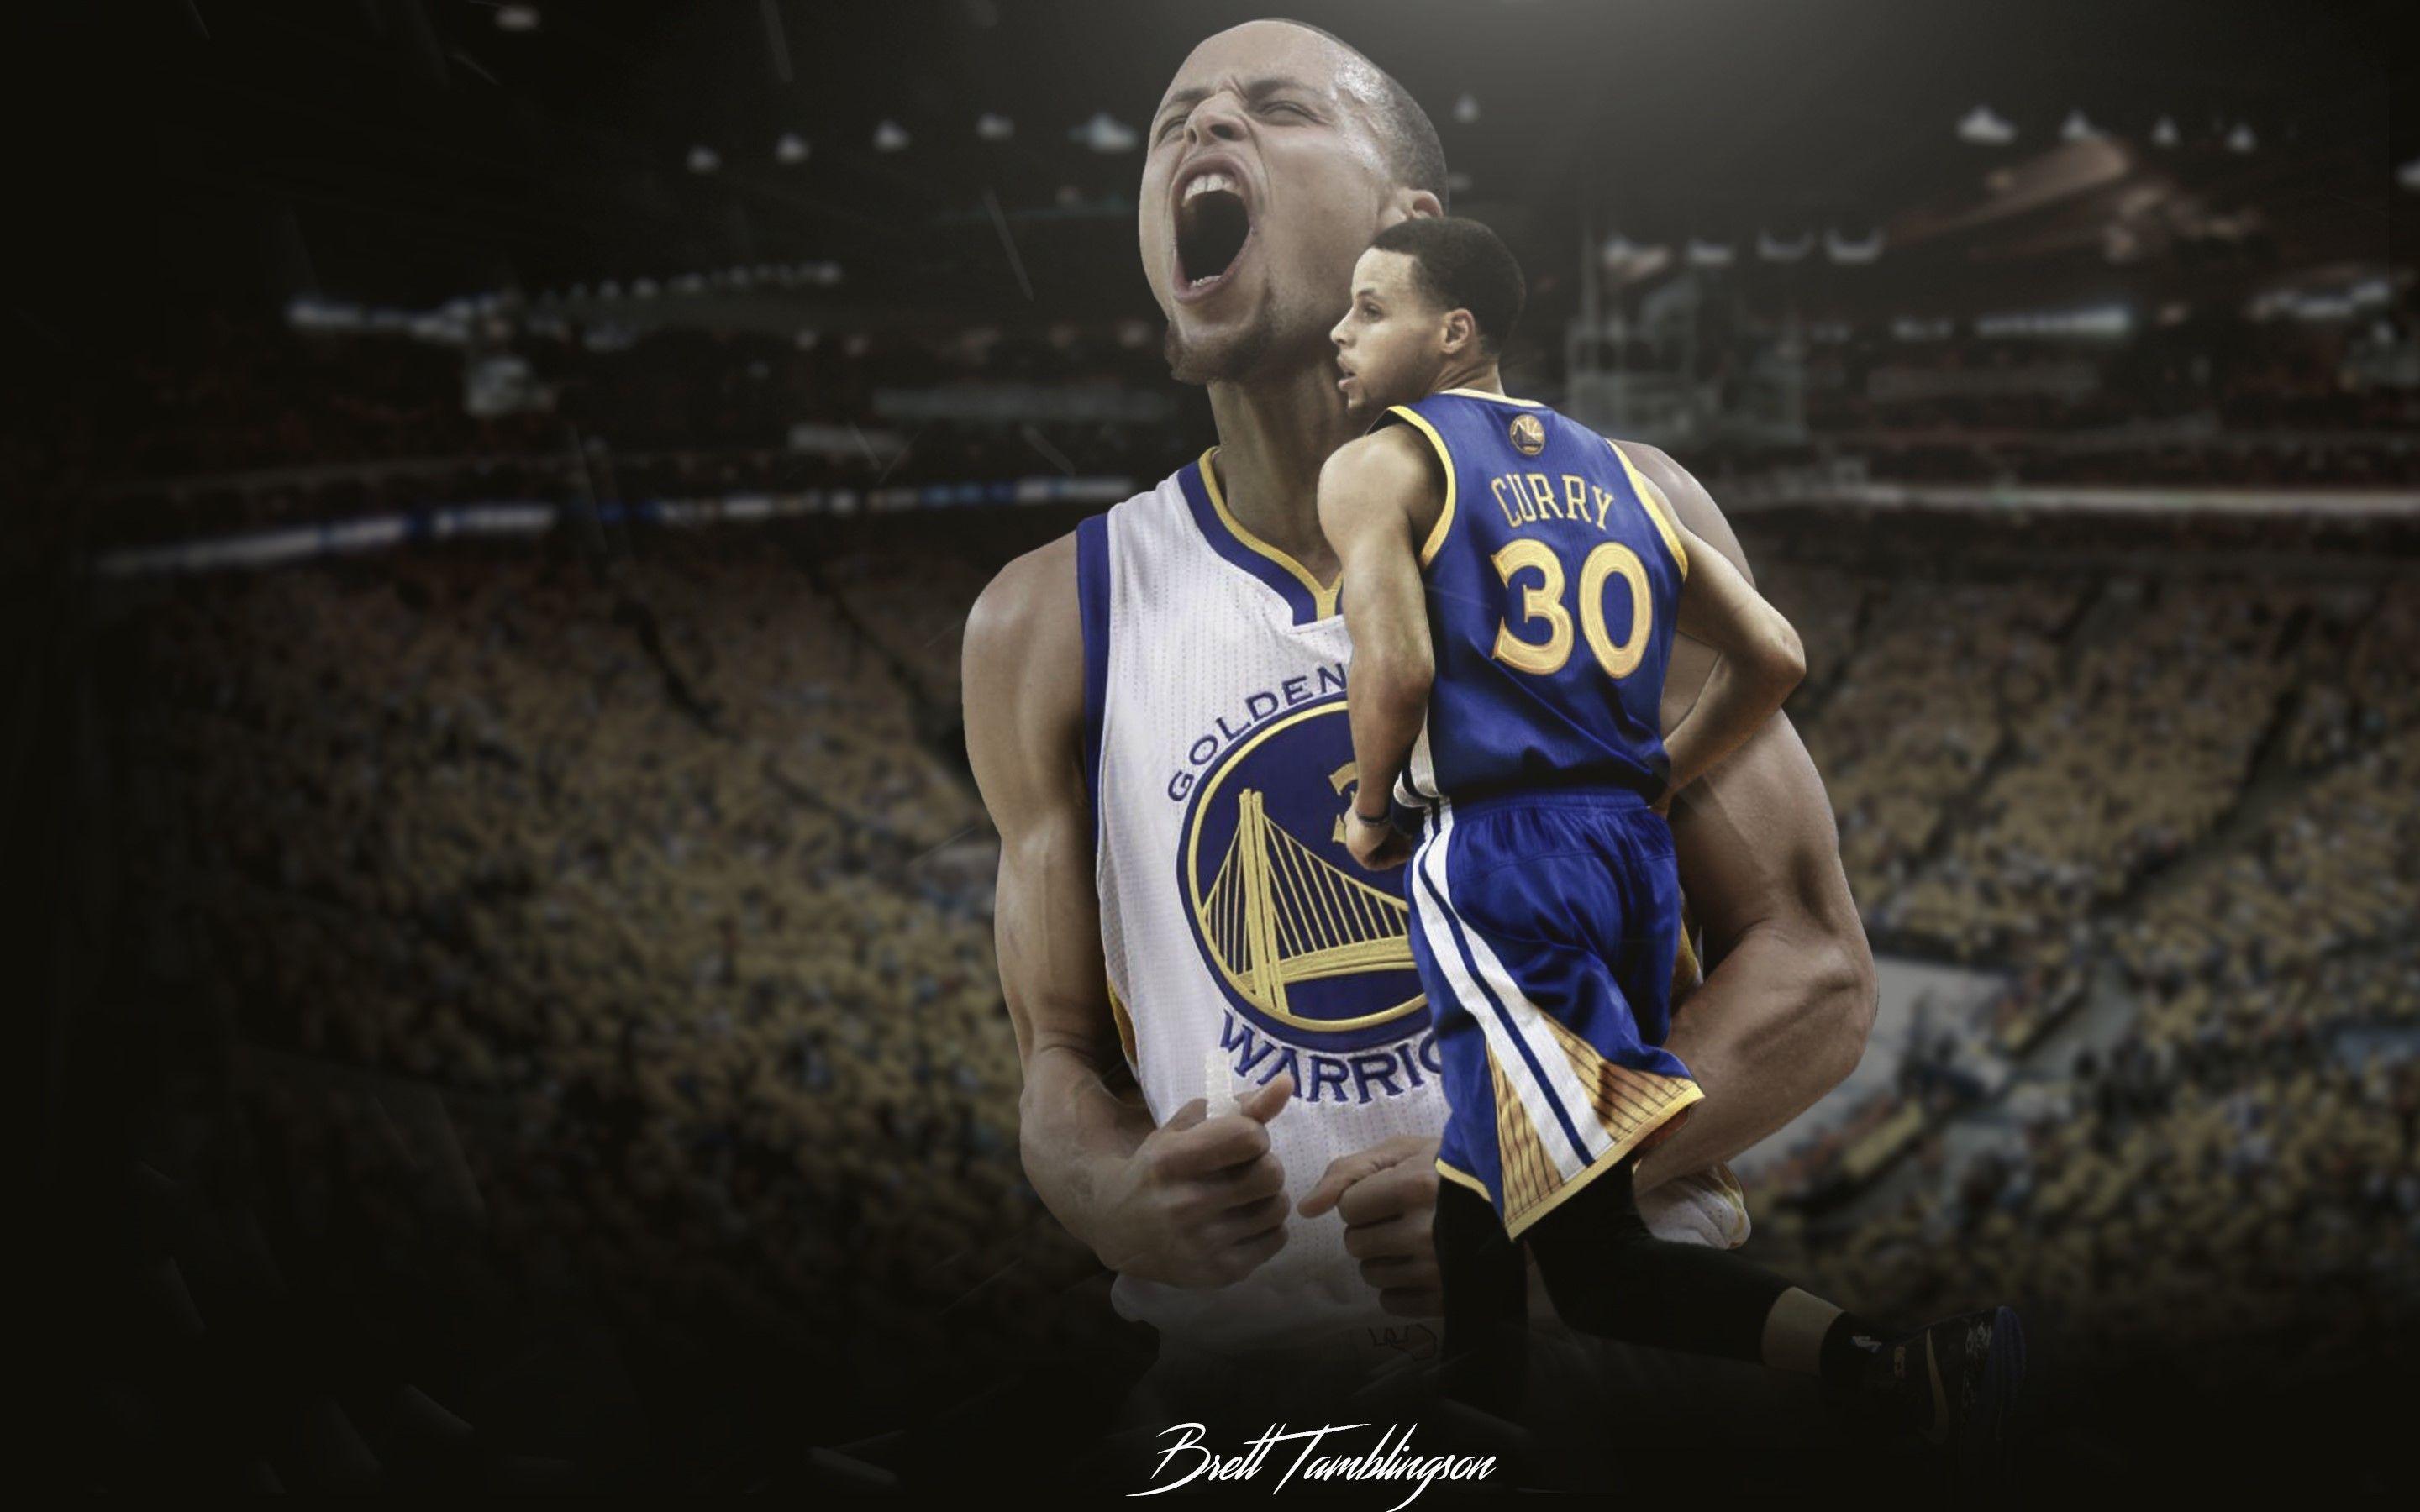 Steph Curry Computer Wallpaper